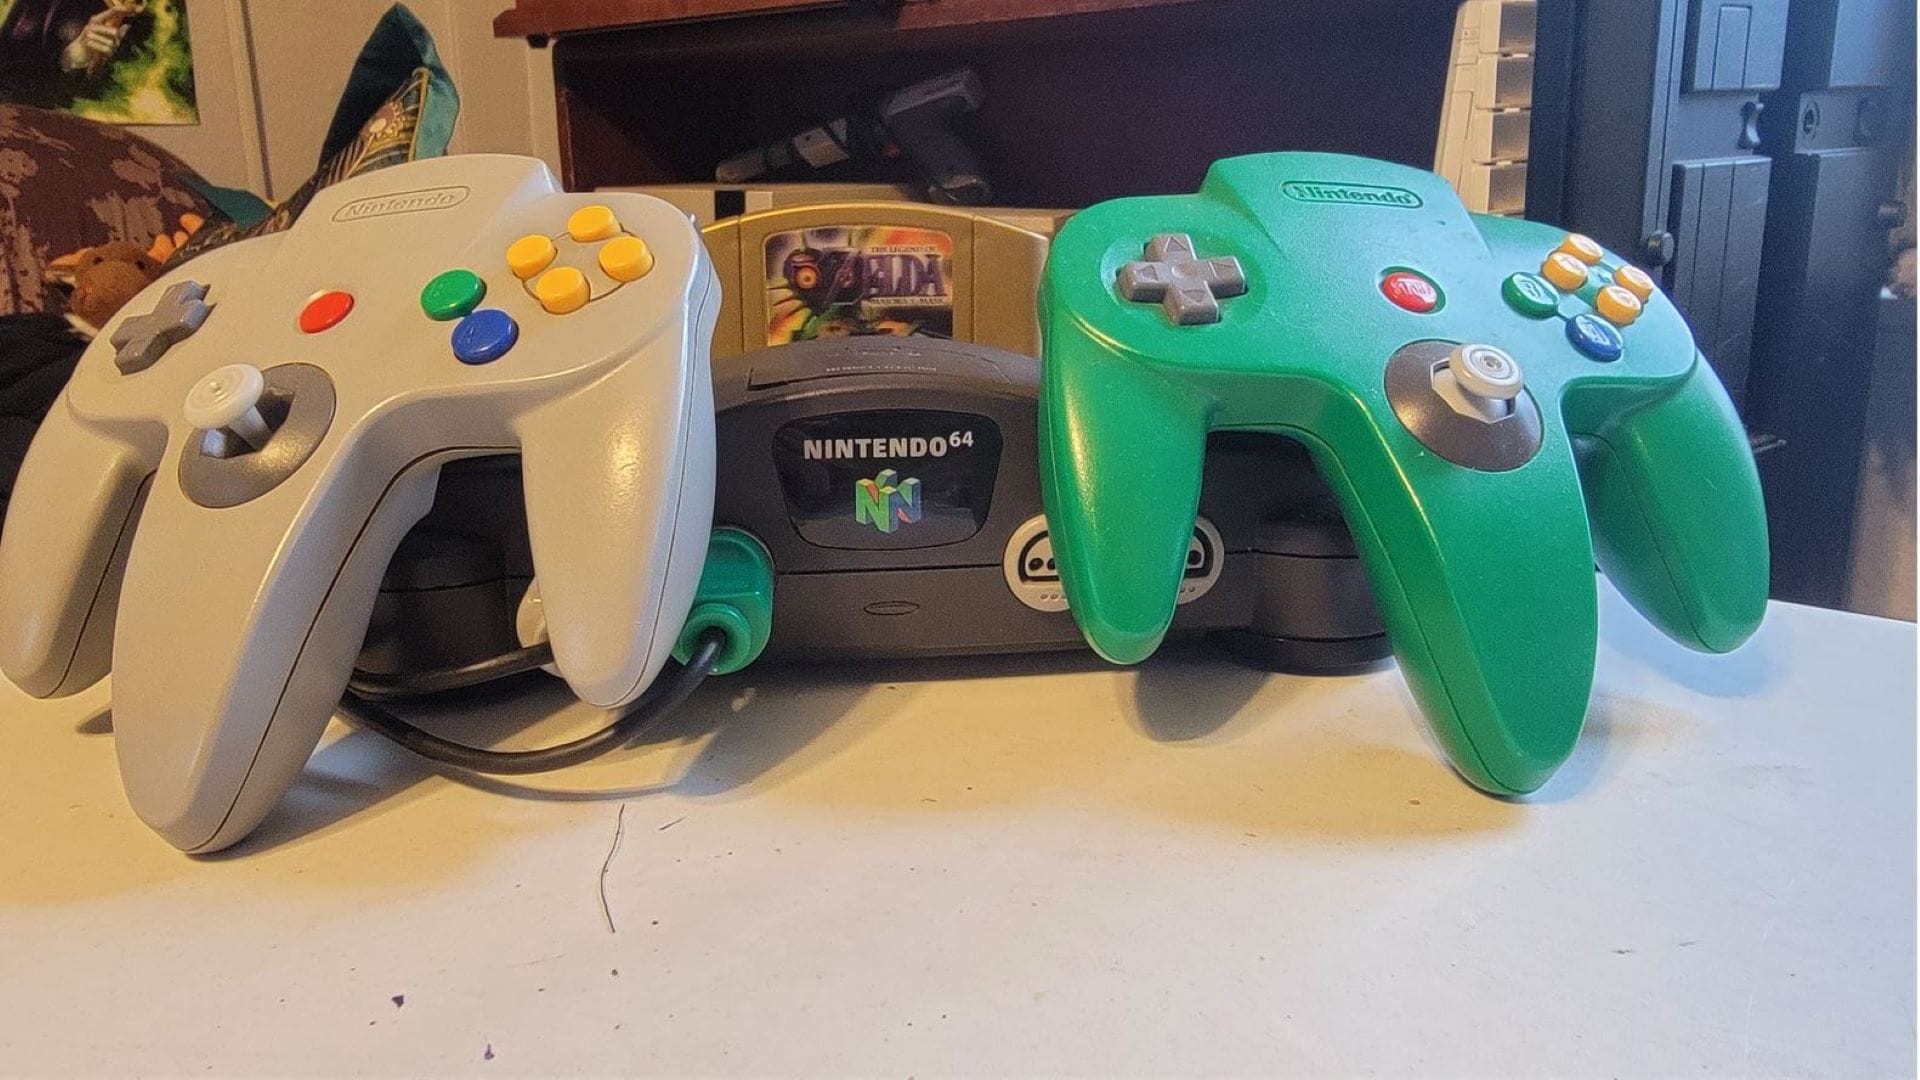 N64: Some More Awesome Things You Didn't Know Your Nintendo 64 Could Do